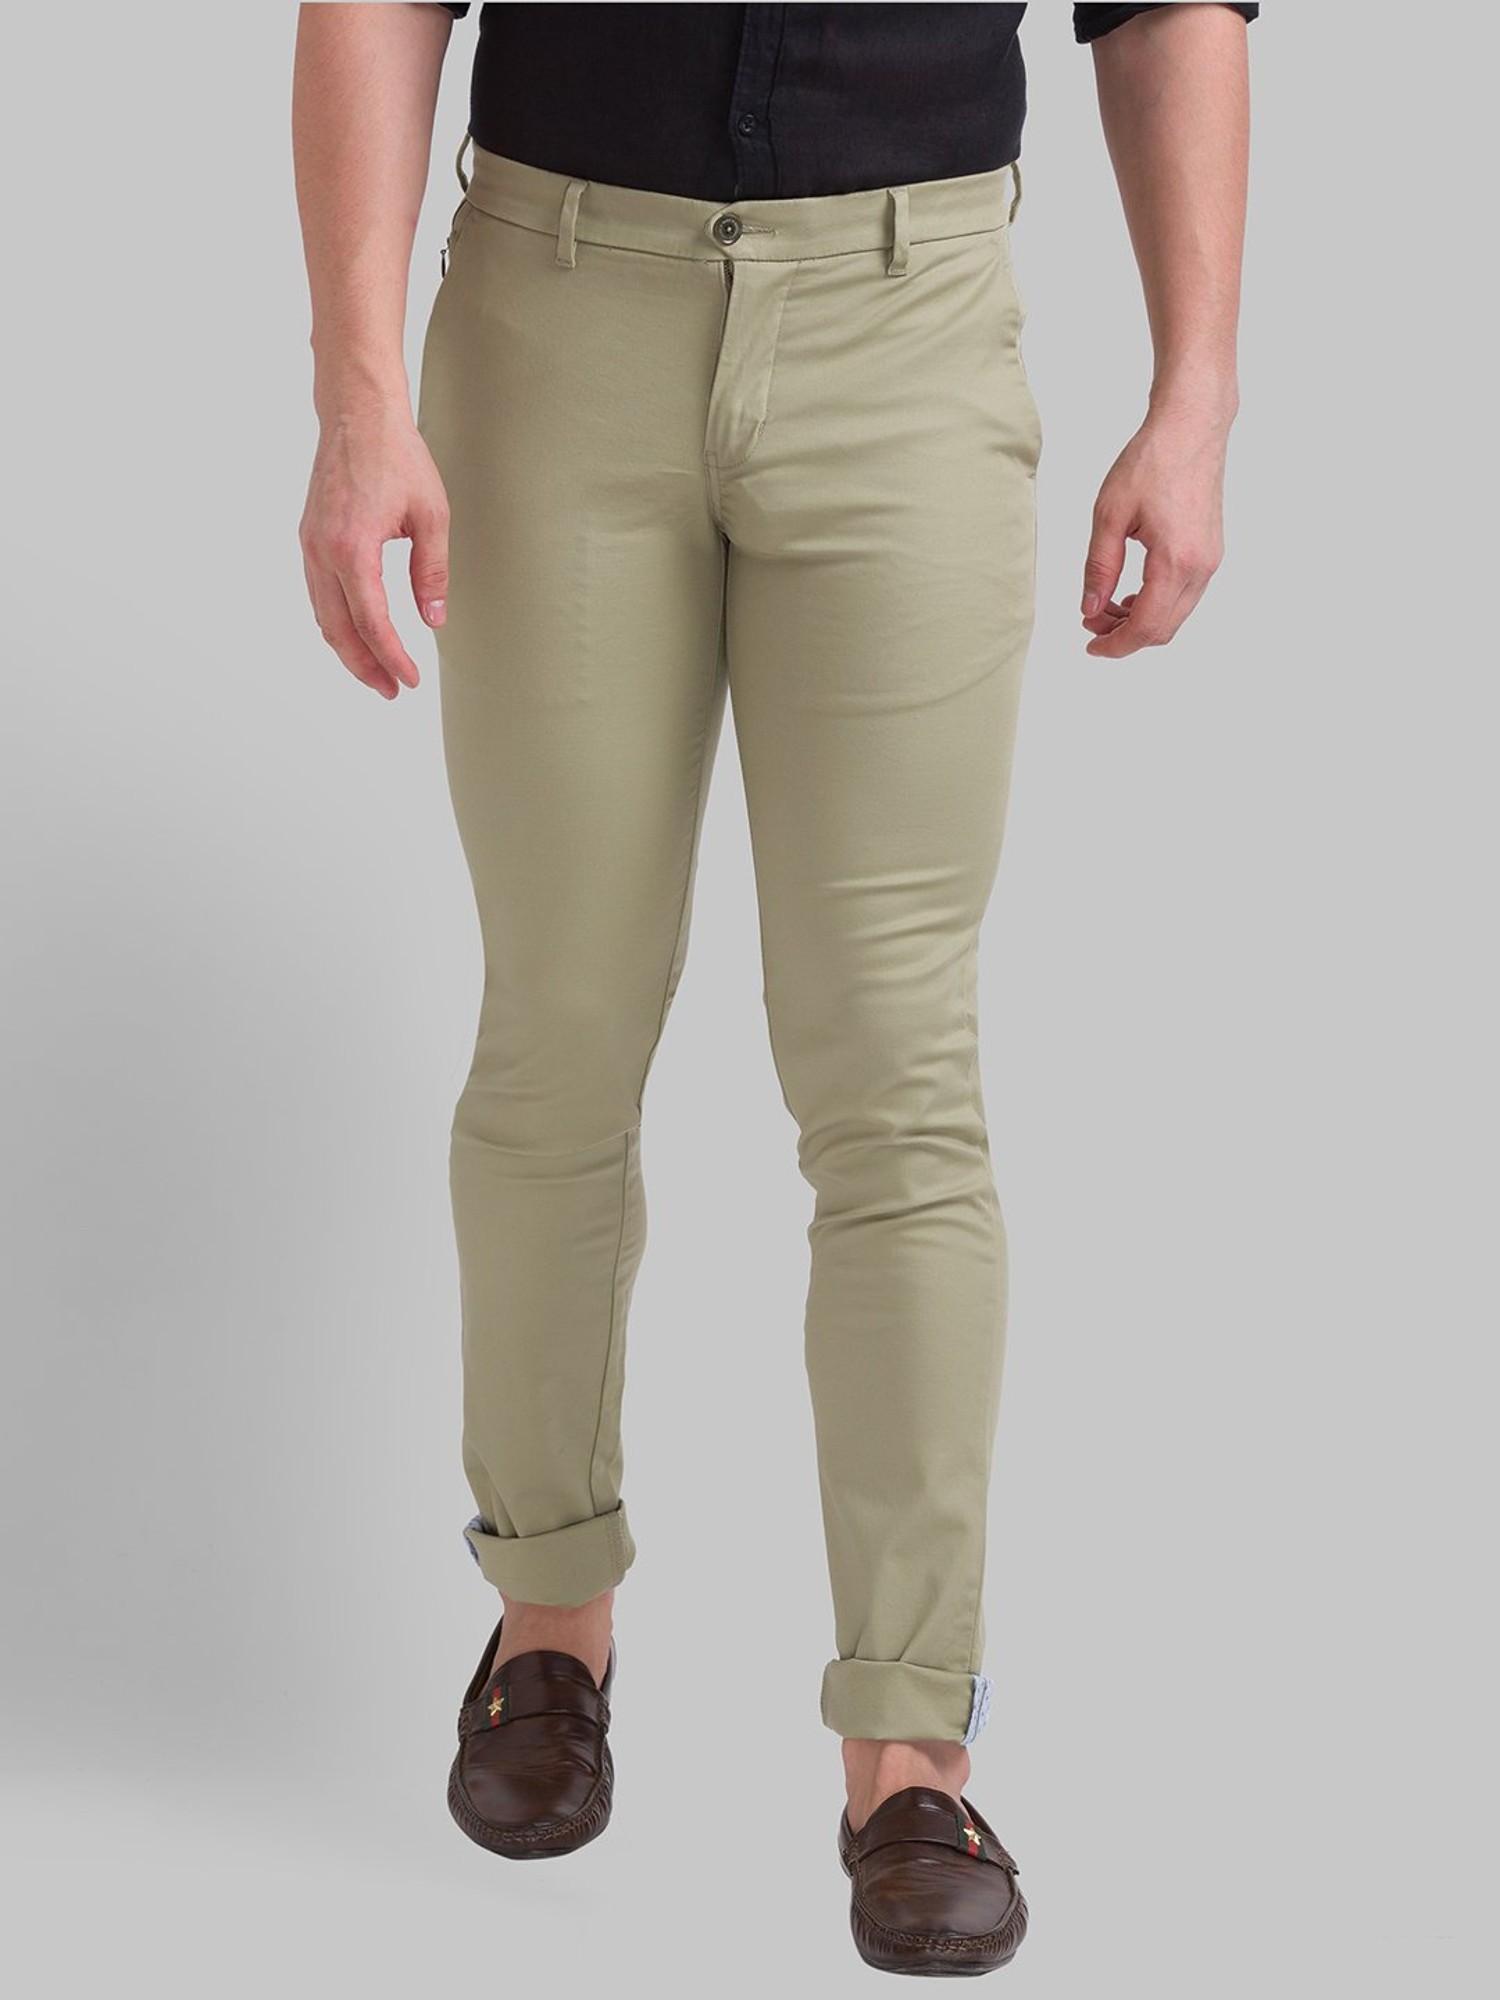 Raymond Parx Grey Super Slim Fit Trouser XMTS02334S482F038 32 in Pune at  best price by Parx Exclusive Store Phoenix Market City Mall  Justdial